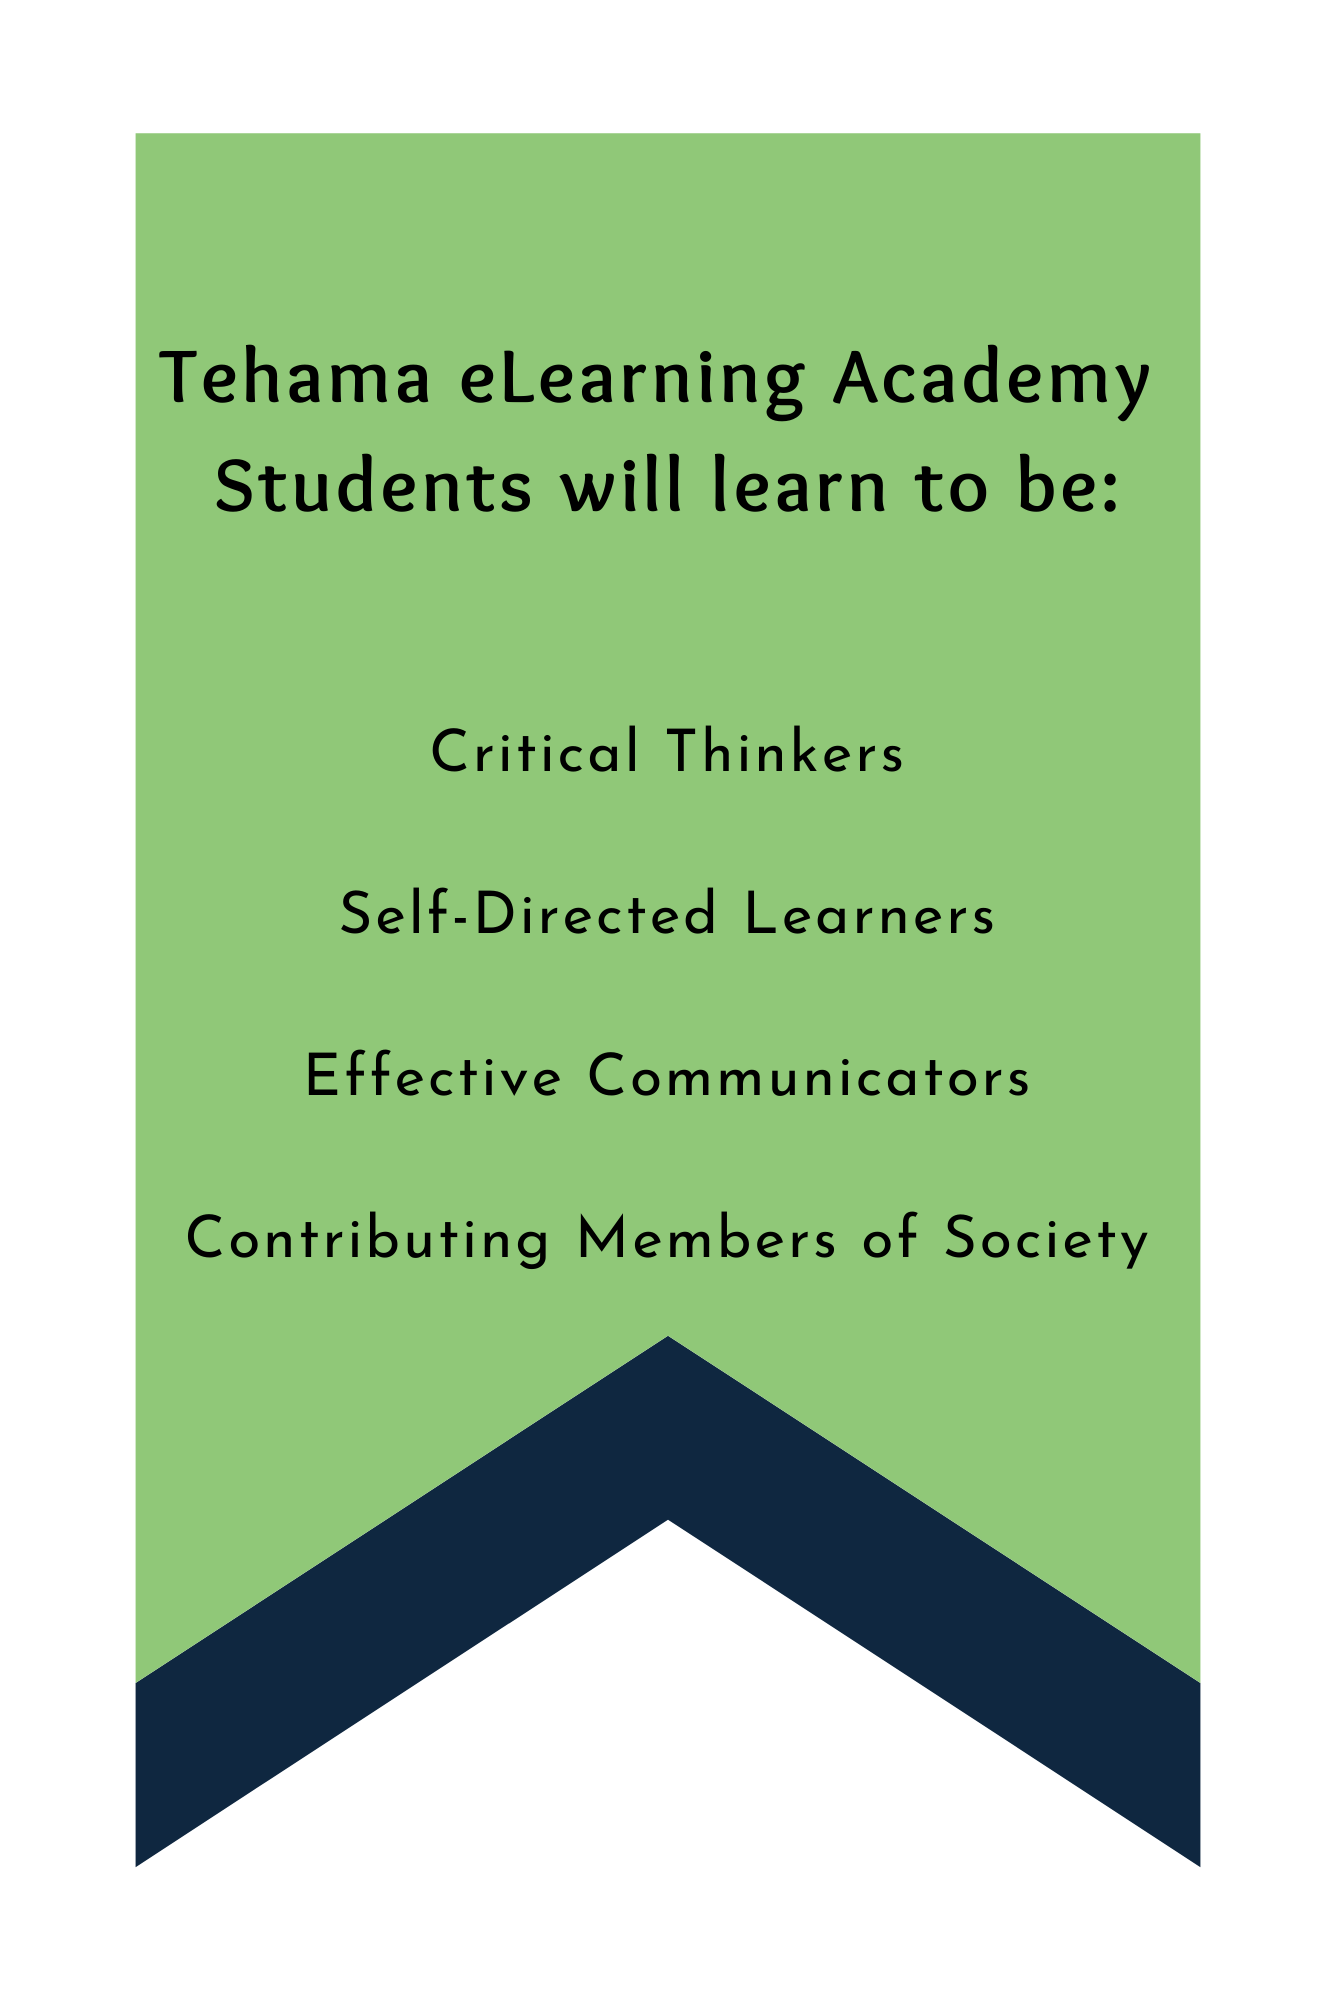 Tehama eLearning Academy Students will learn to be: Critical Thinkers, Self Directed Learners, Effective Communicators, and Contributing Members of Society